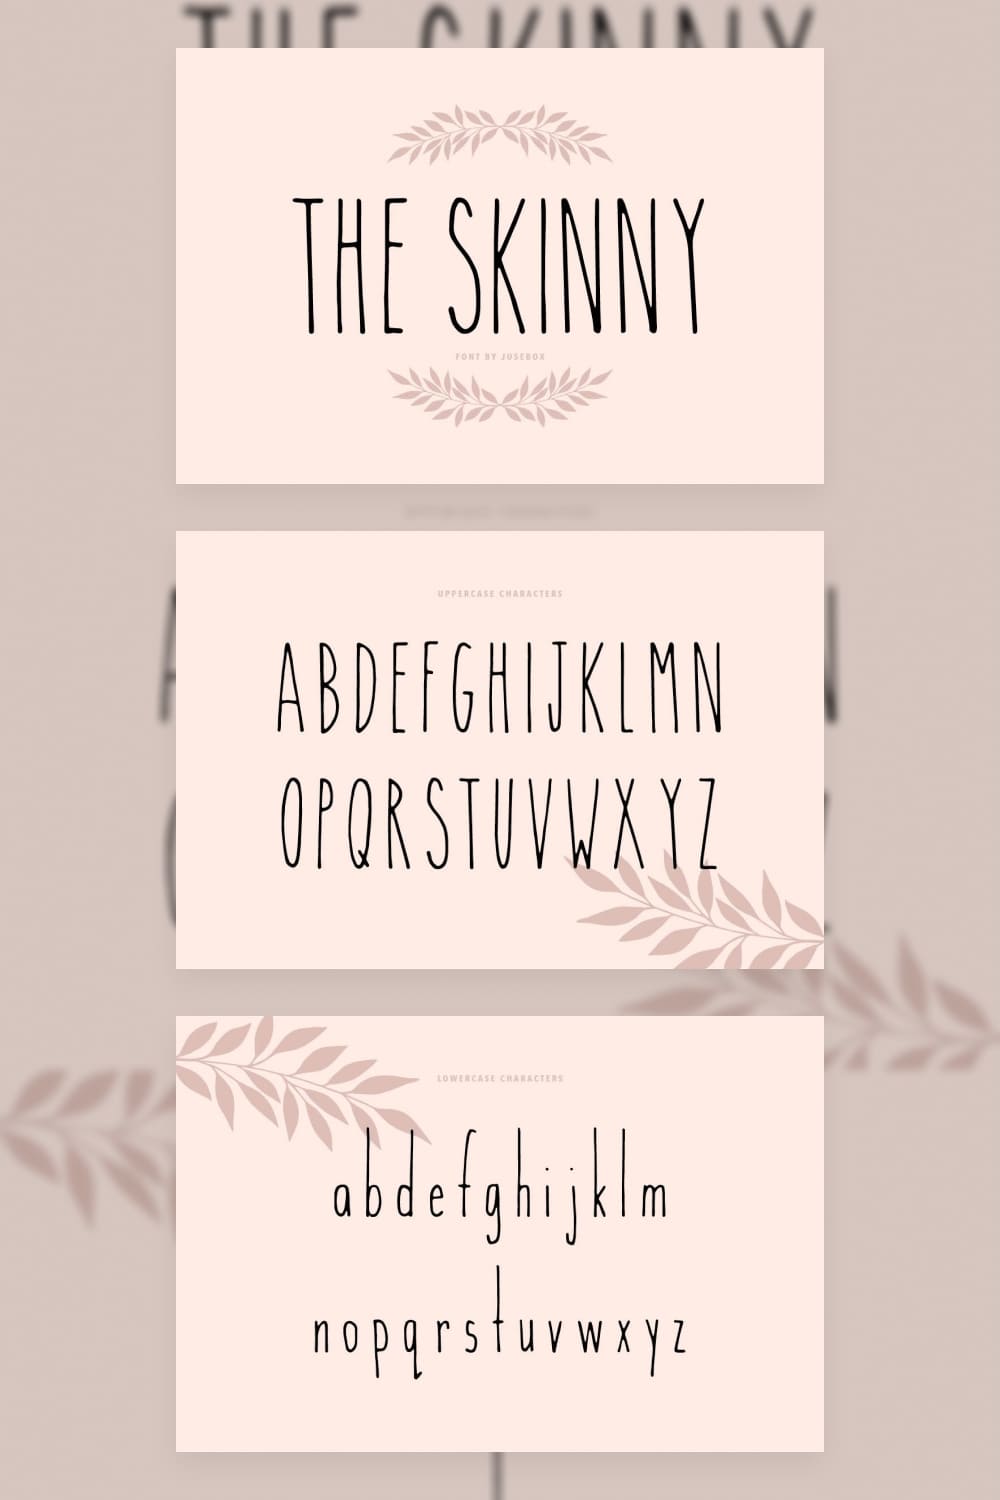 The Skinny is a sleek and simple handwritten font.